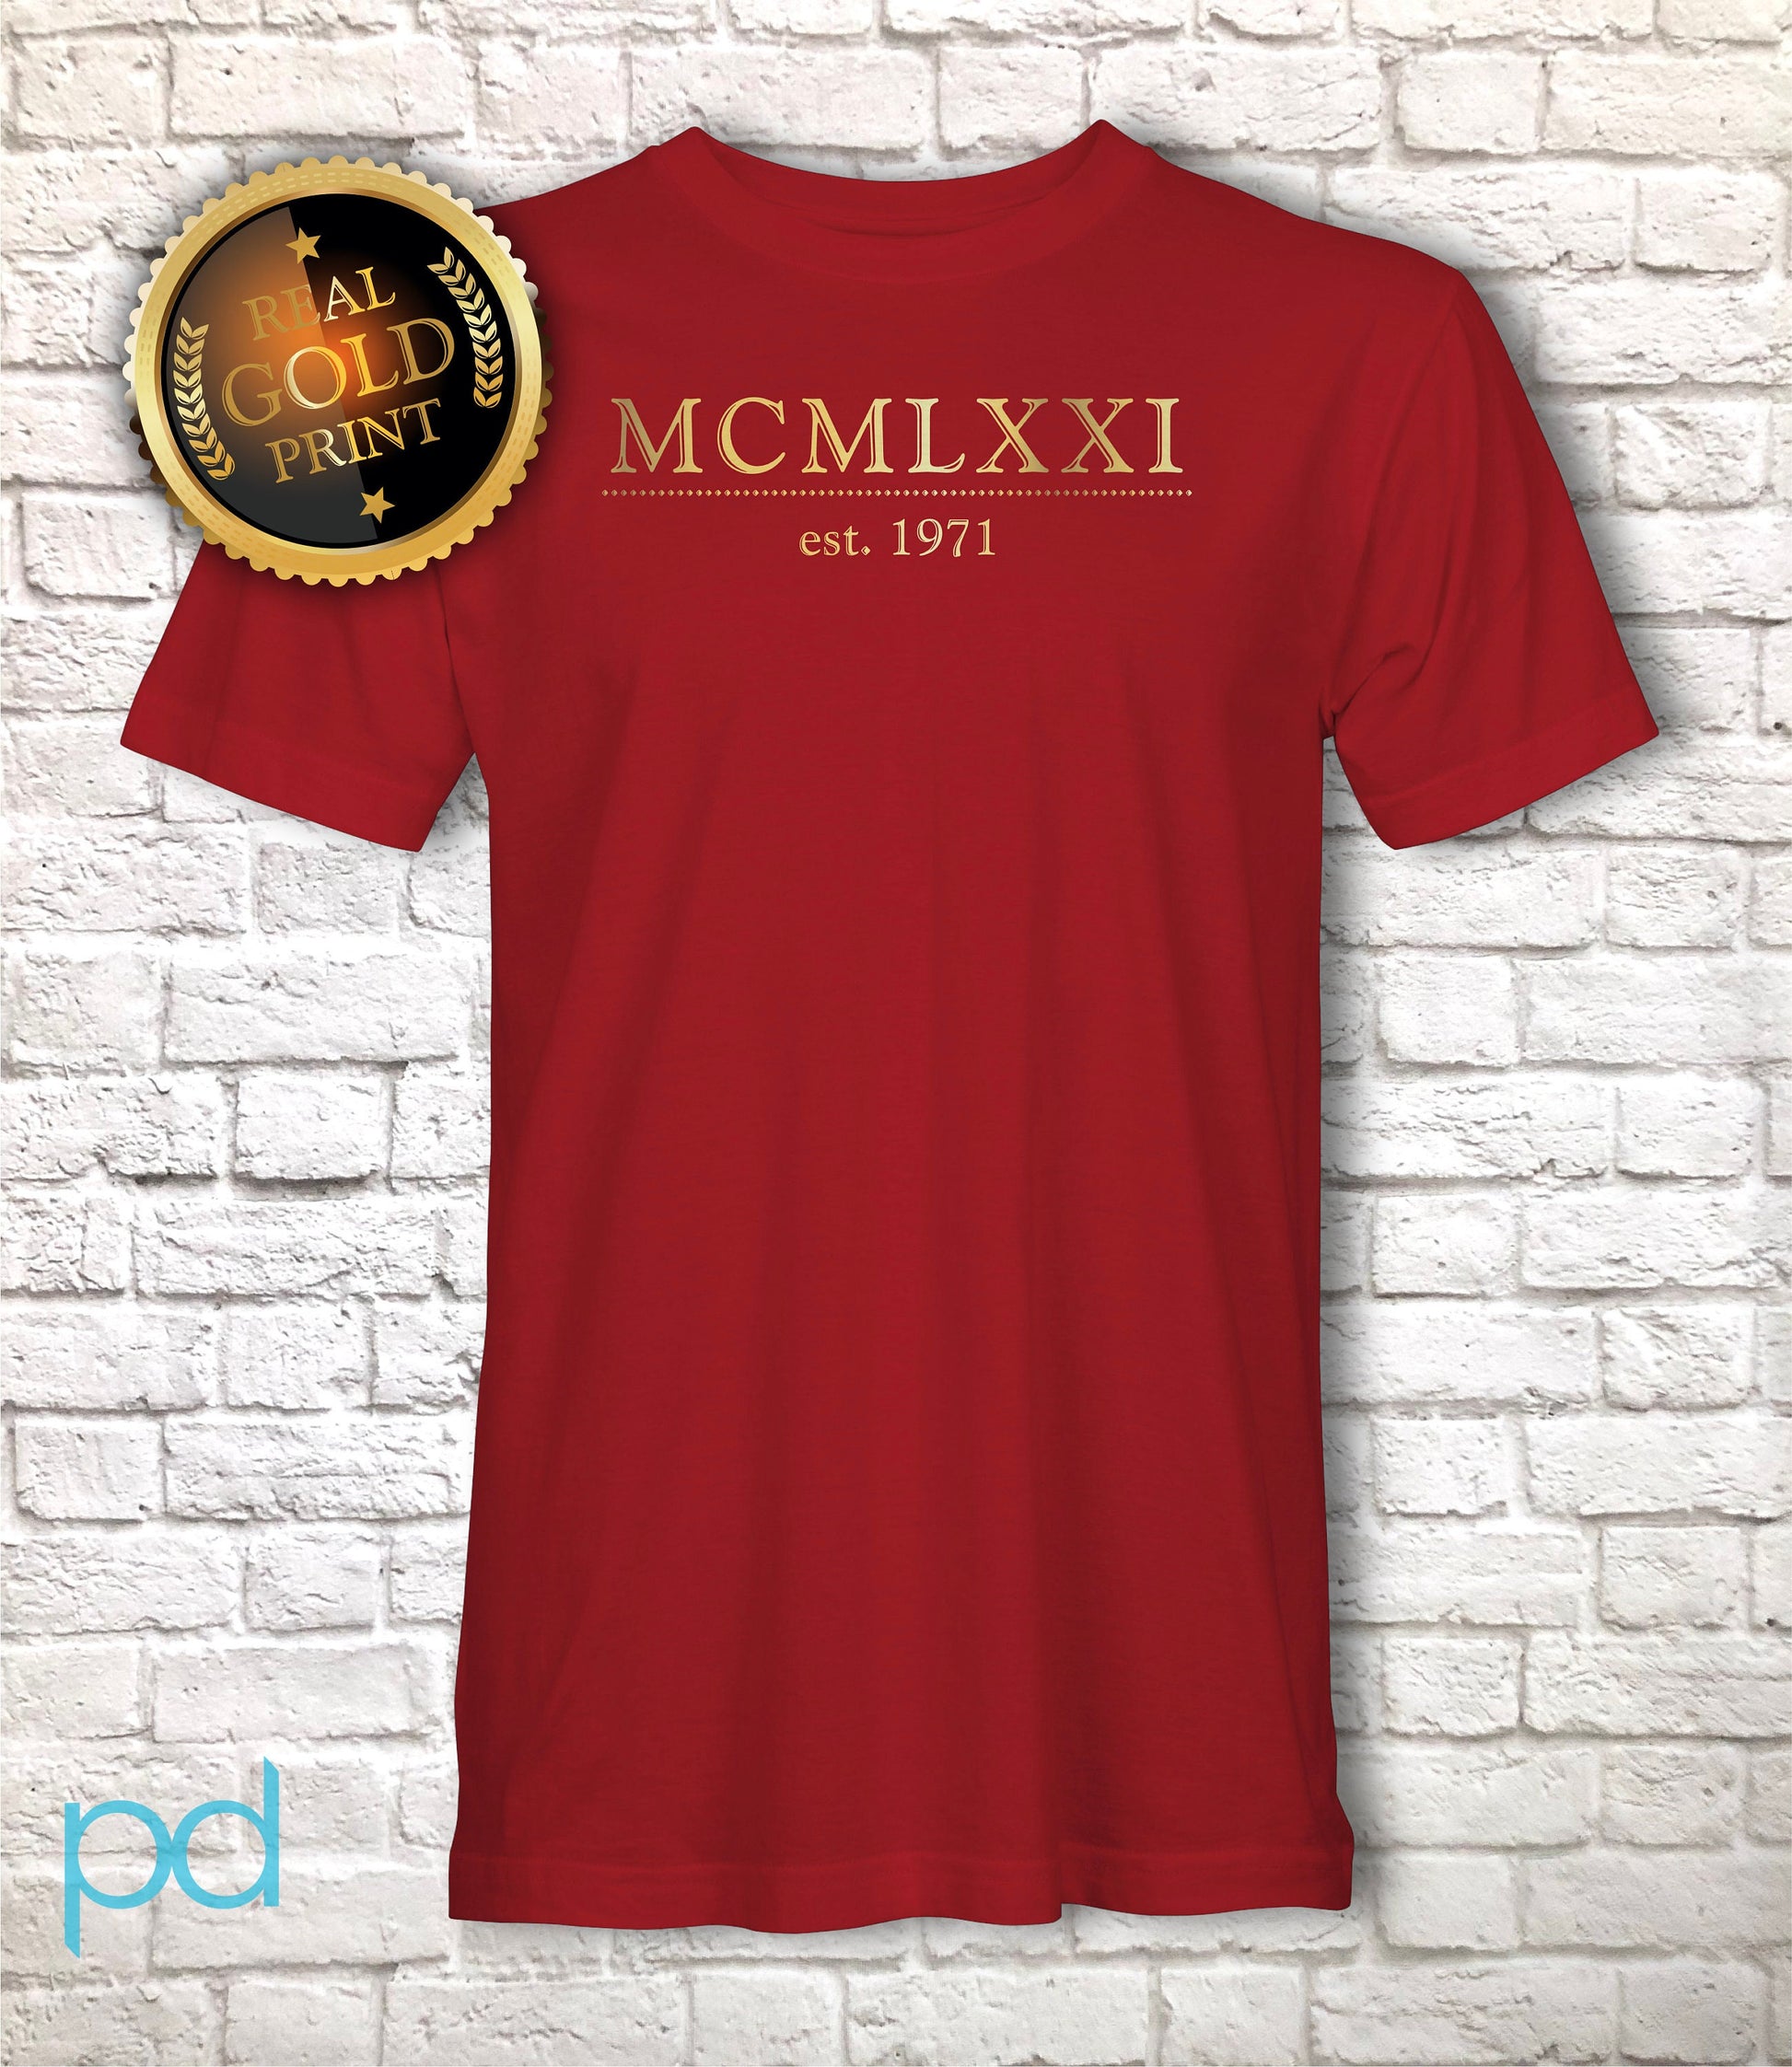 est. 1971 T Shirt Metallic Gold Foil Print, 51st Birthday Gift T-Shirt in Classic Traditional Style, MCMLXXI Fiftieth Unisex Tee Shirt Top